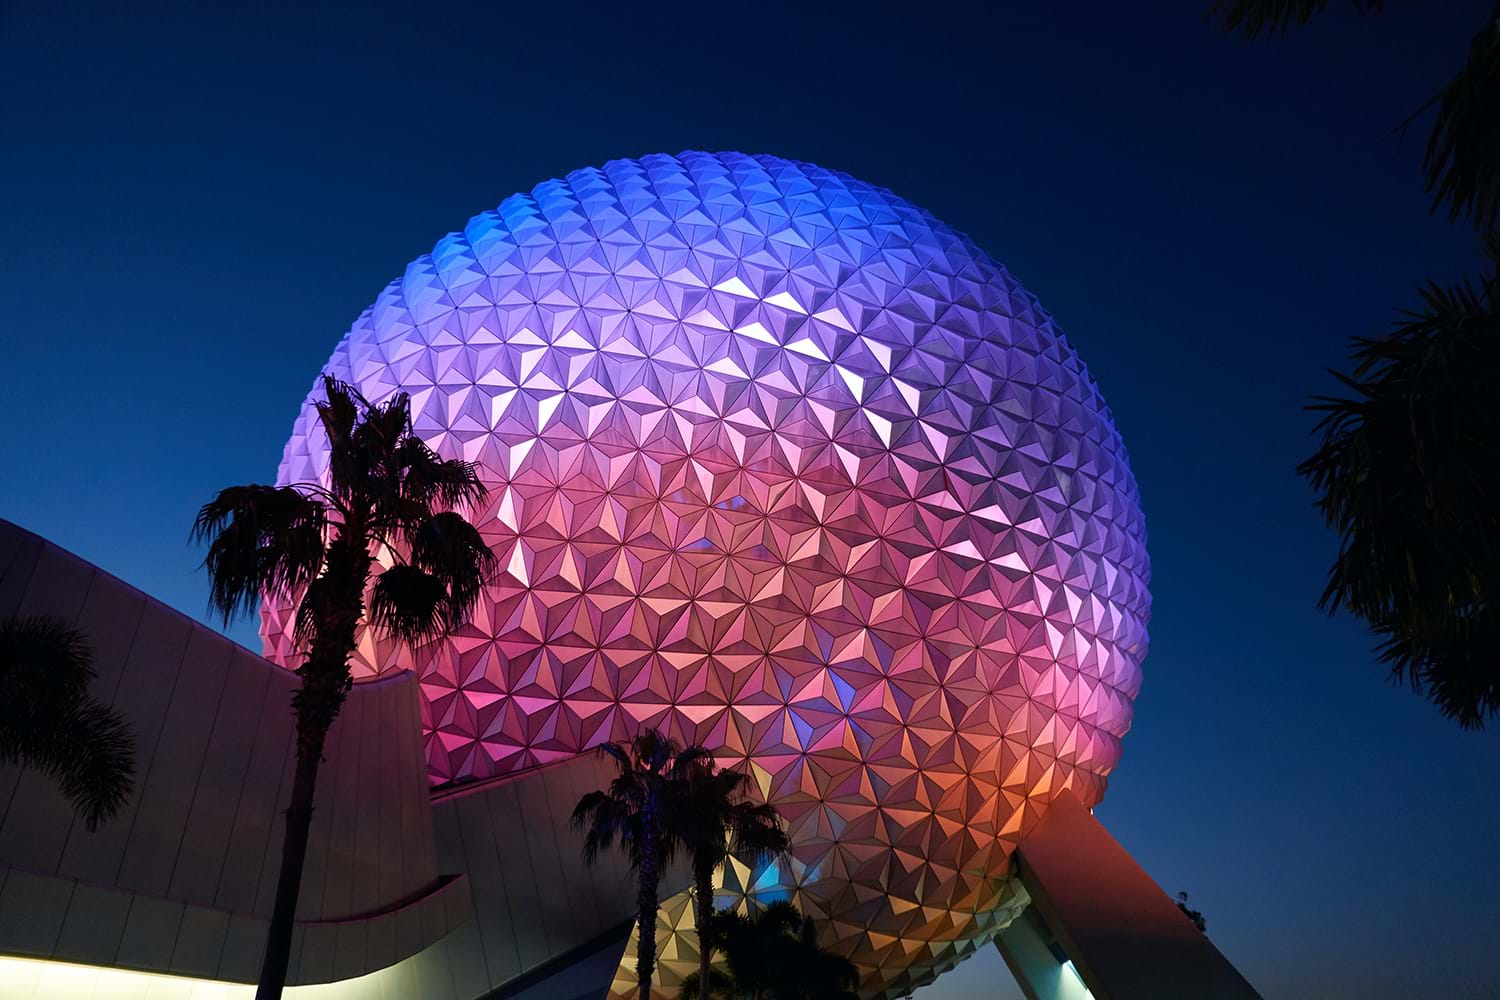 Epcot sphere lit by colorful lights at night